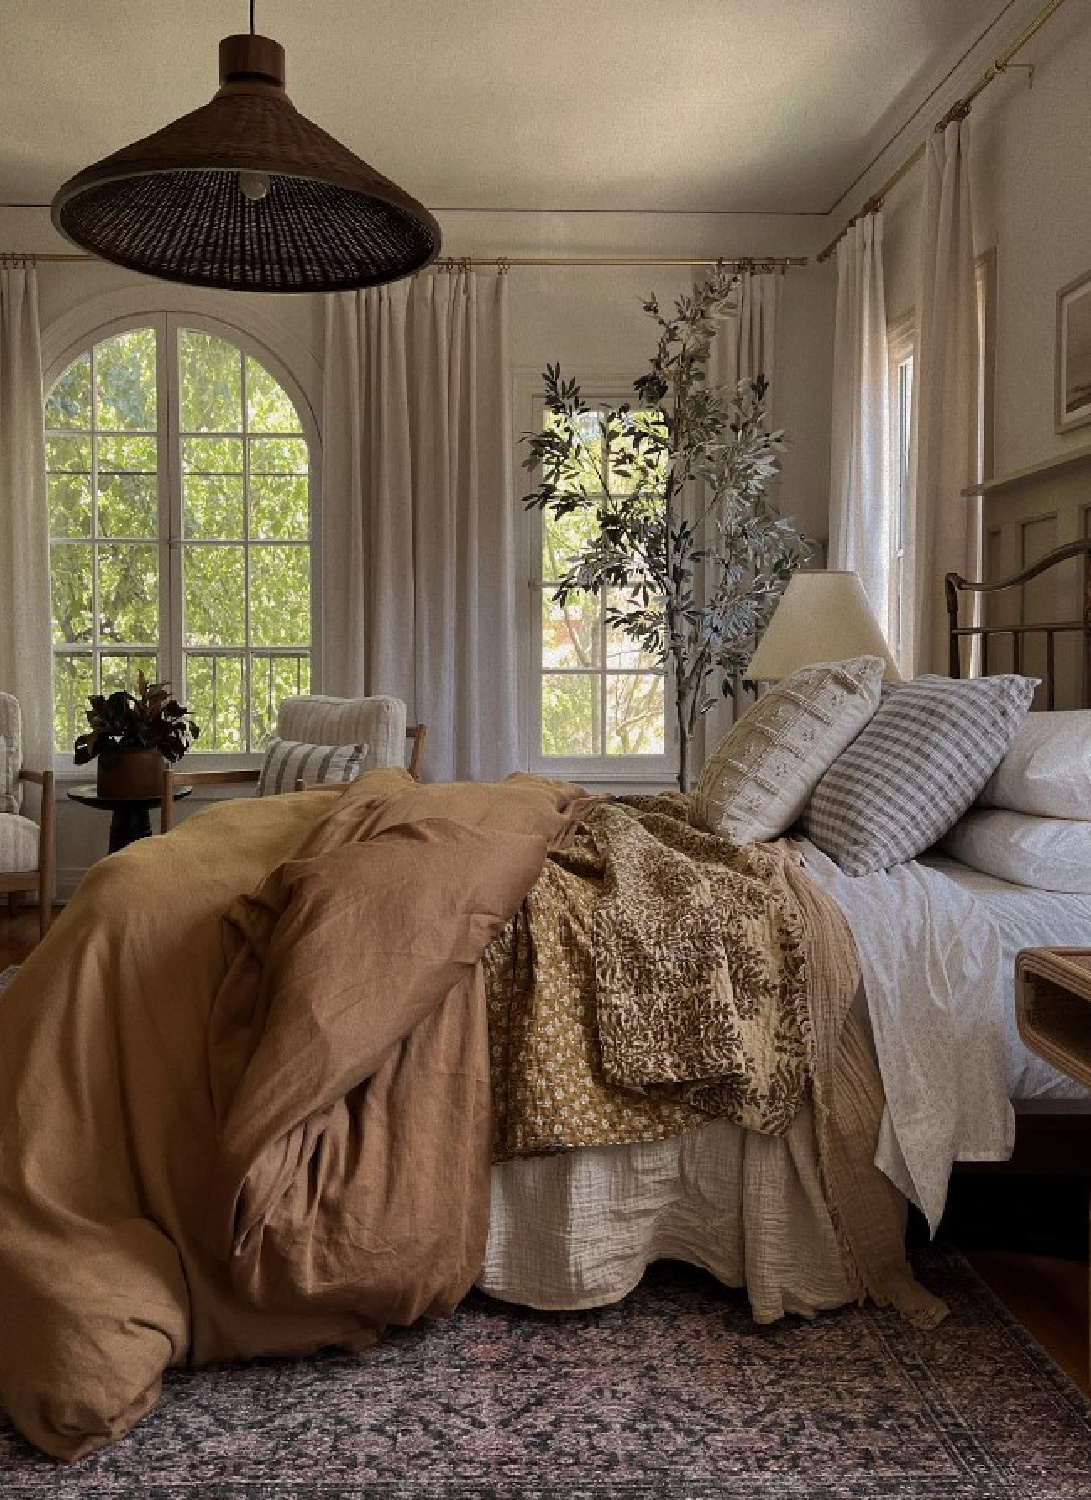 Lone Fox/Amber Lewis cozy modern rustic romantic bedroom with warm colors, sumptuous bedding and rug, arched windows, and soothing California organic cool vibe. #cozybedrooms #cozyluxe #amberlewisbedroom